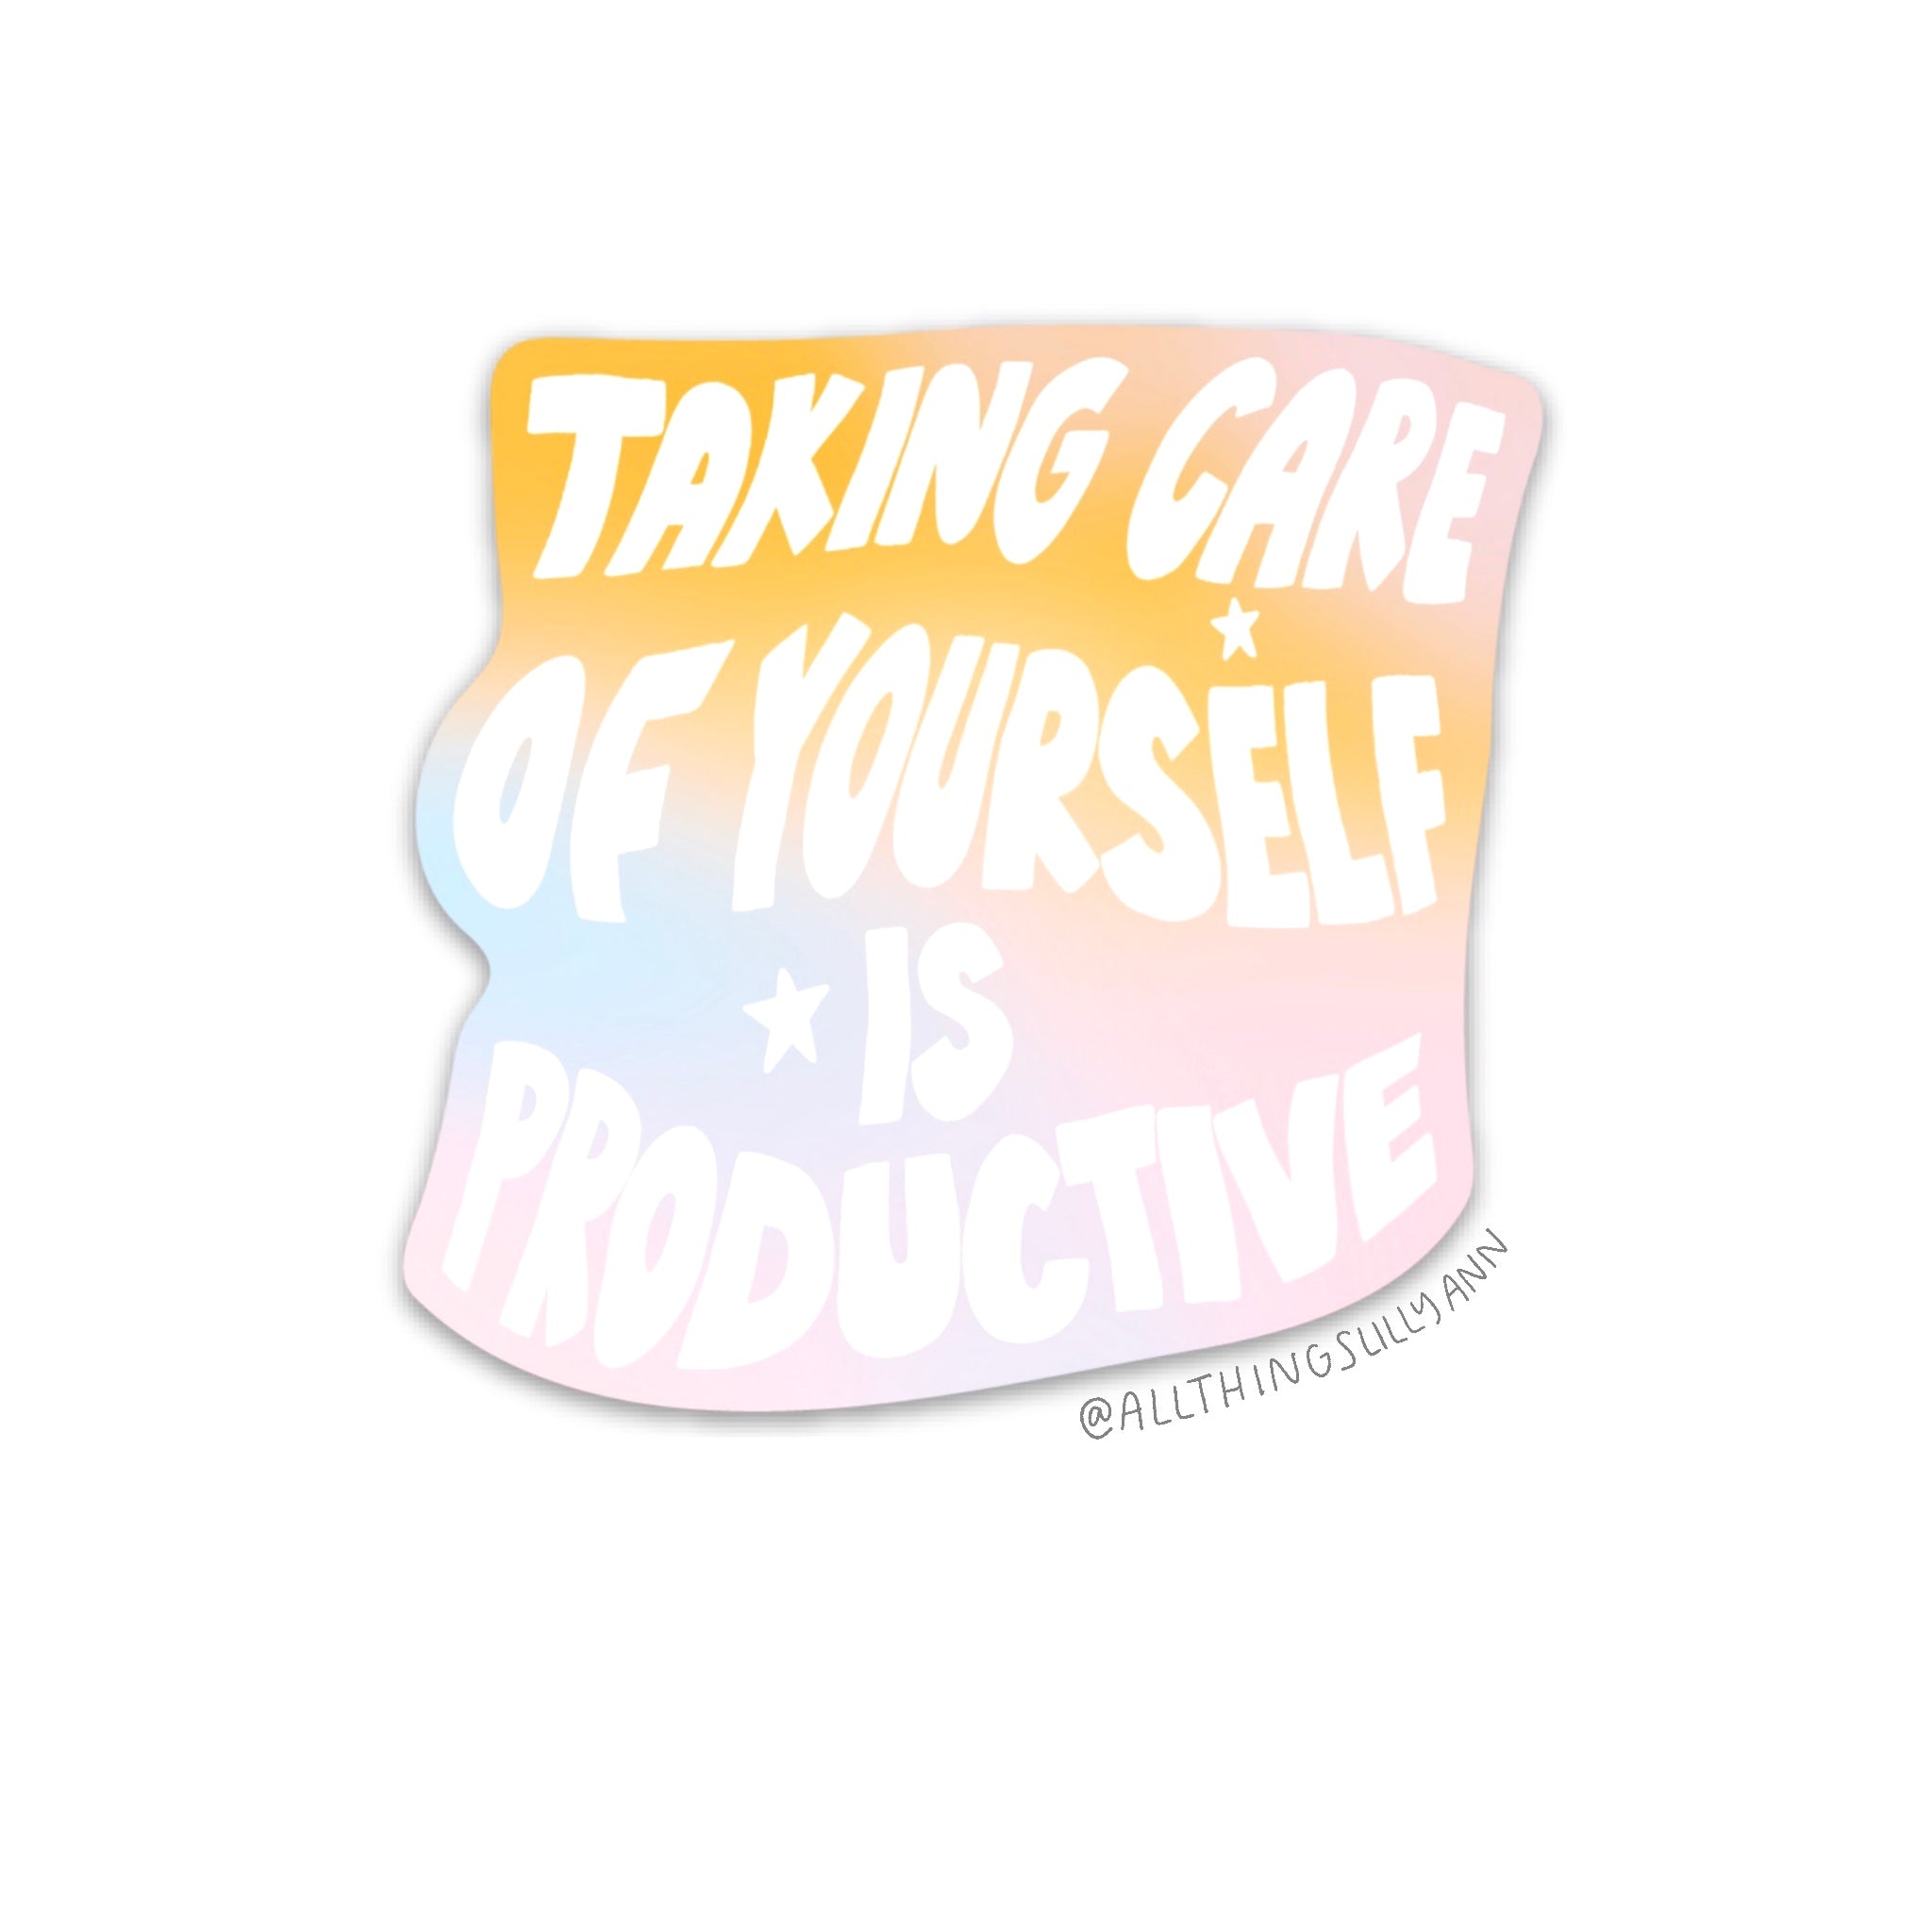 TAKING CARE OF YOURSELF IS PRODUCTIVE STICKER